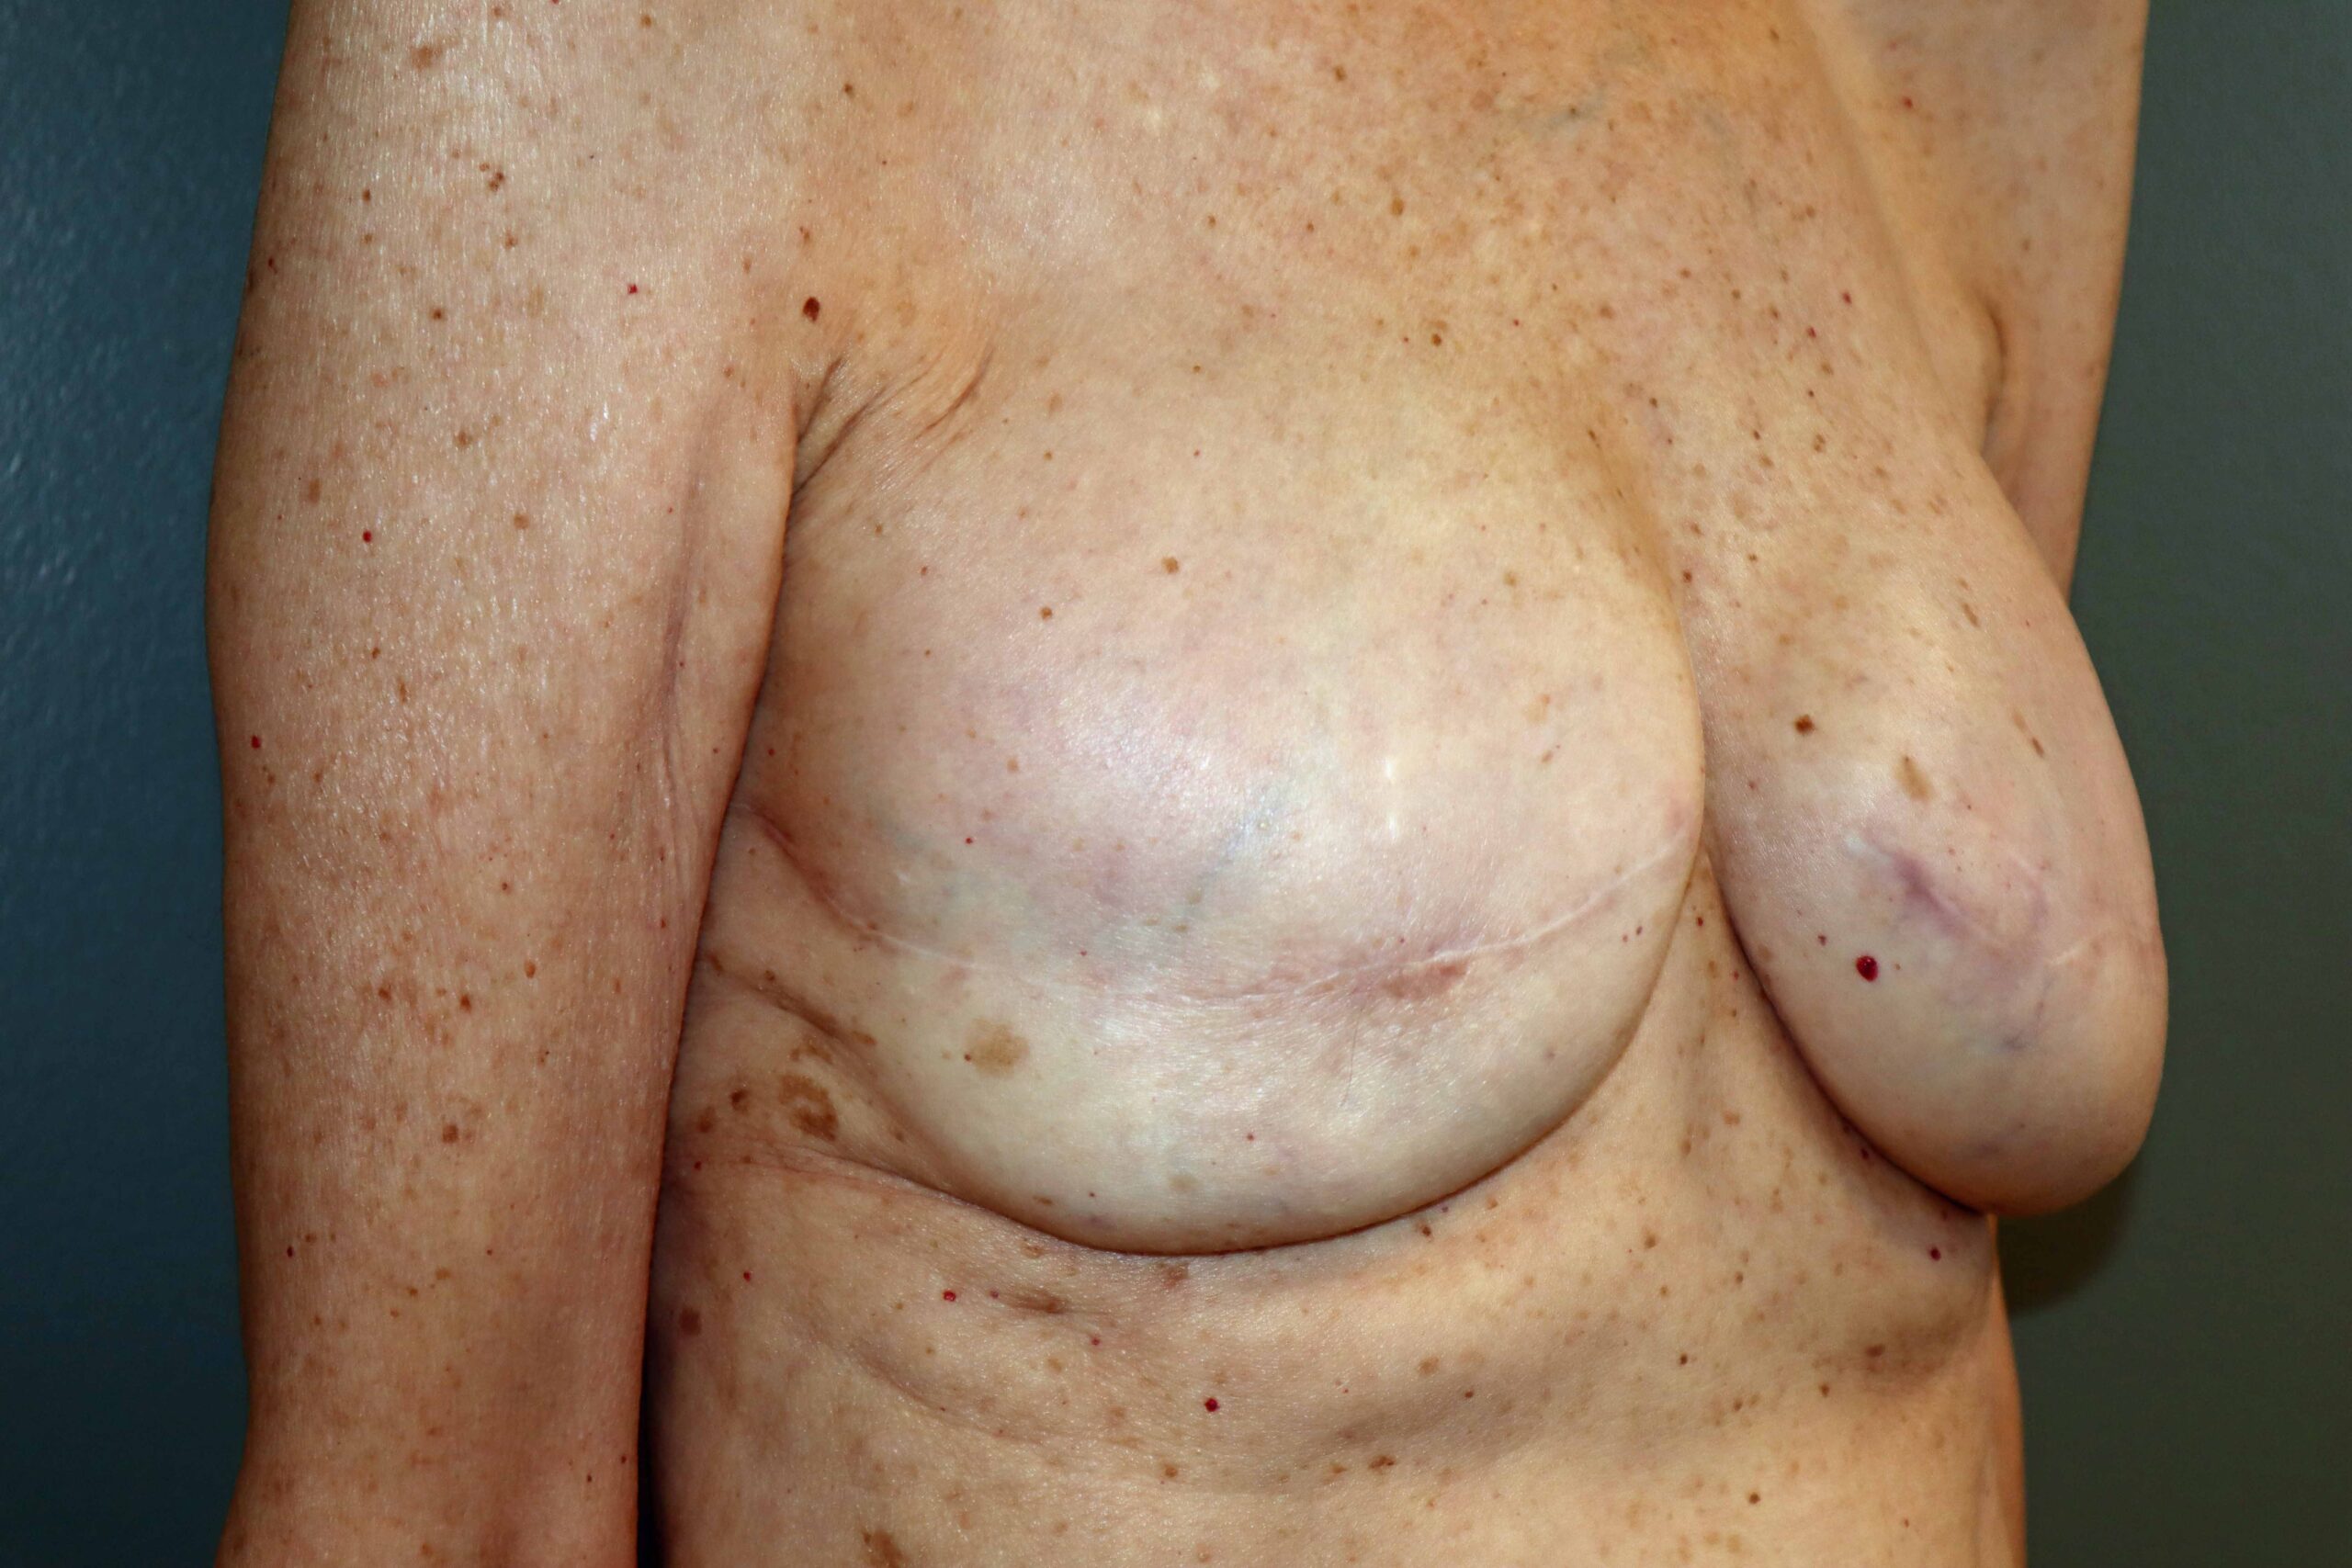 Patient F - Bilateral Breast Reconstruction following Breast